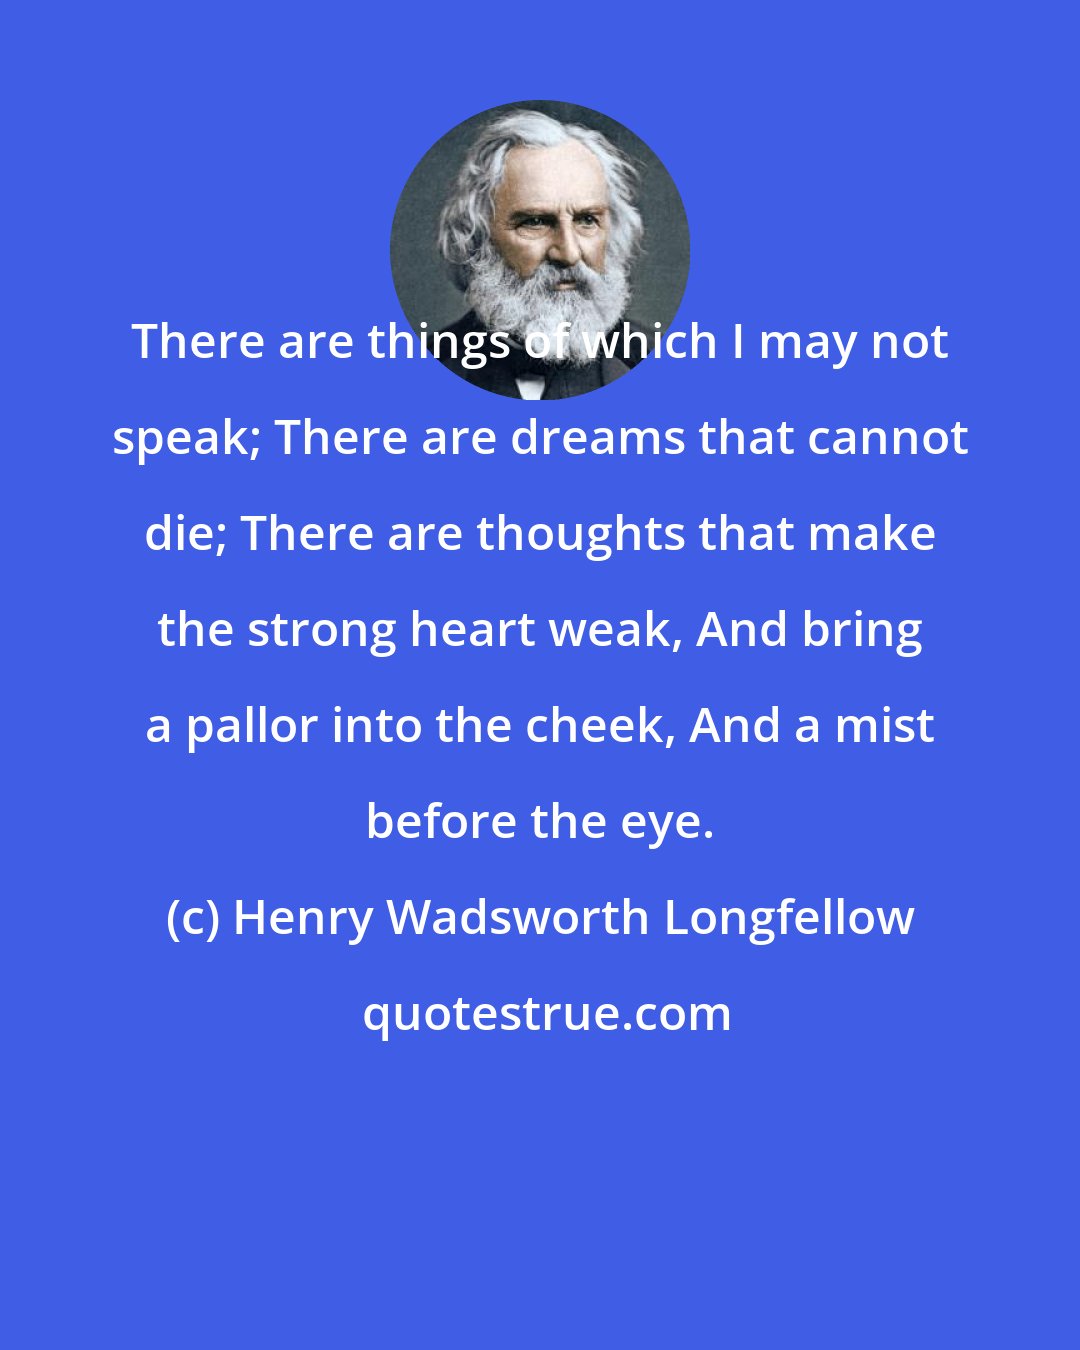 Henry Wadsworth Longfellow: There are things of which I may not speak; There are dreams that cannot die; There are thoughts that make the strong heart weak, And bring a pallor into the cheek, And a mist before the eye.